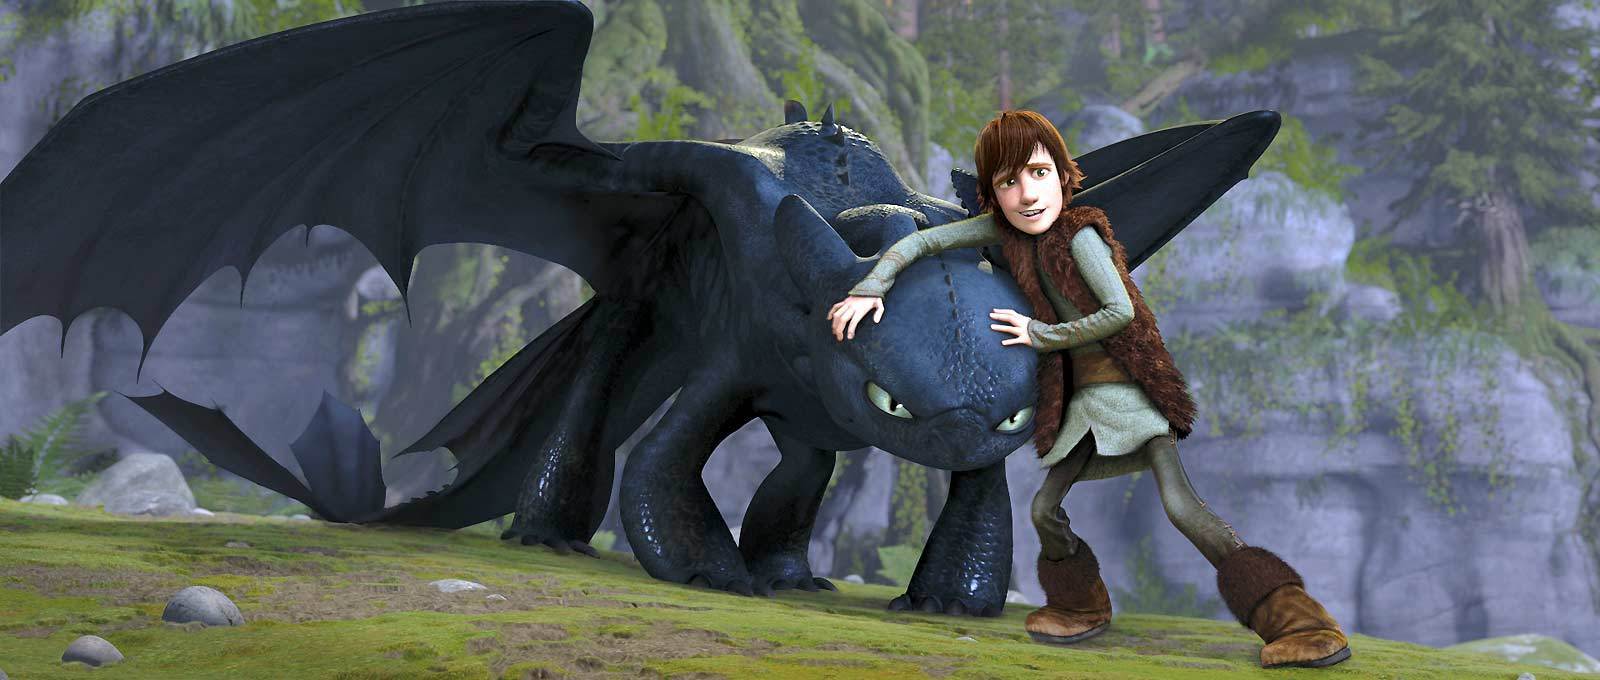 Train Your Dragon Image Hiccup Toothless Wallpaper Photos